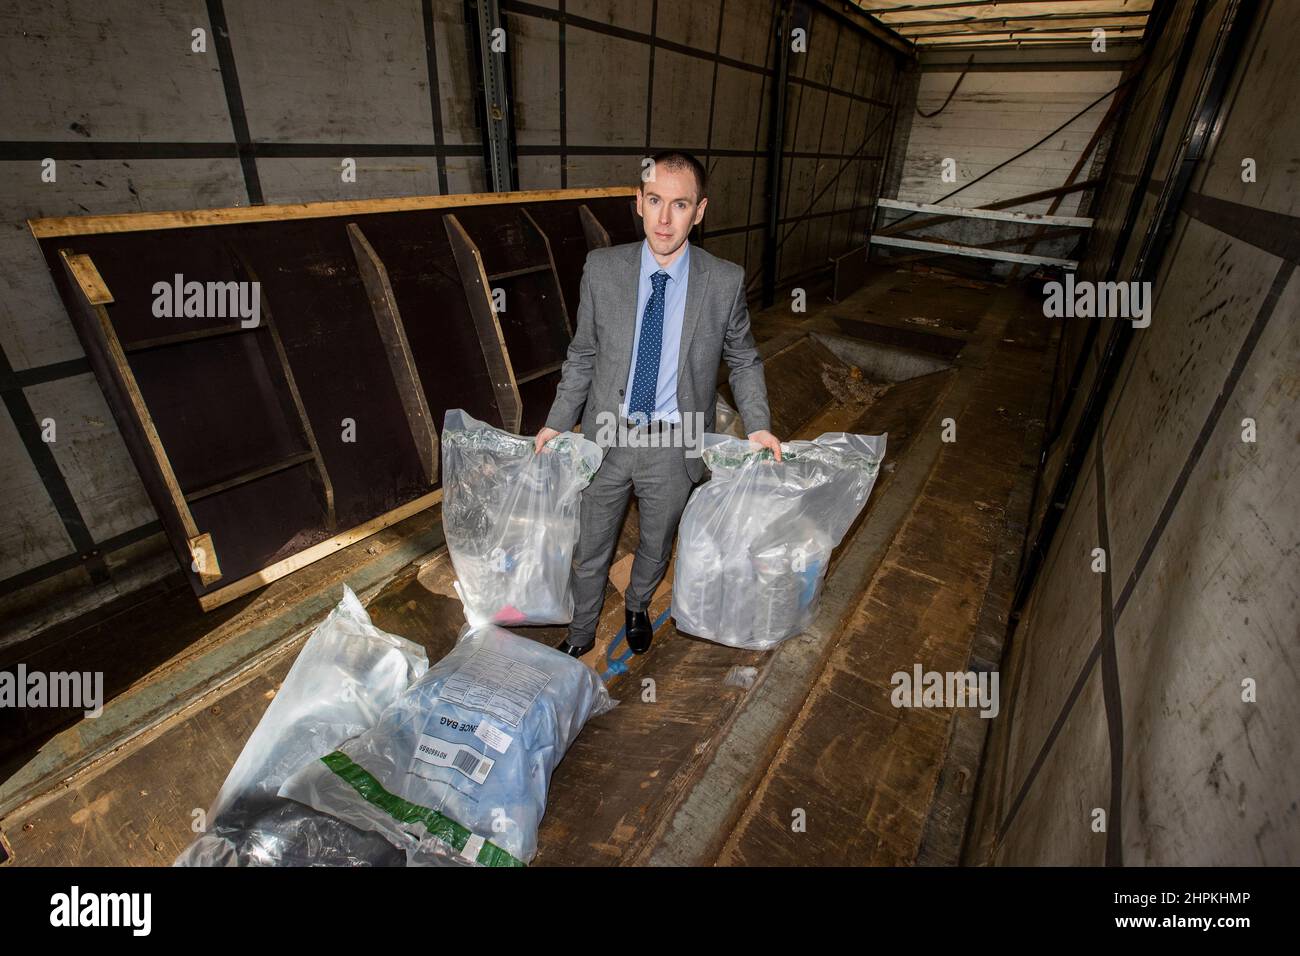 Police Service of Northern Ireland (PSNI) Detective Inspector Conor Sweeney of the Organised Crime Task Force at a location in Greater Belfast, showing part of a £3 million drug seizure that was intercepted at Belfast Harbour. The find is one of Northern Ireland's largest recorded. Stock Photo